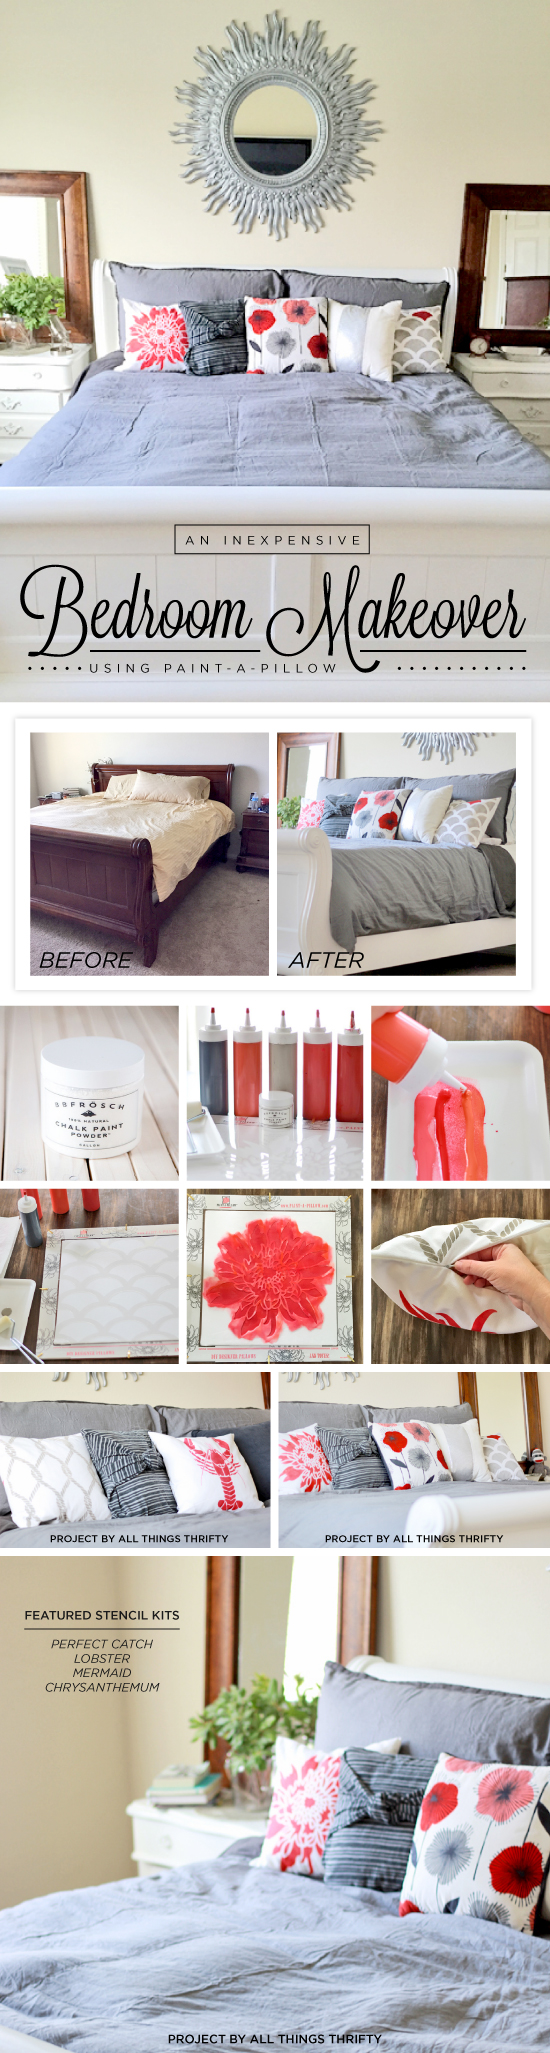 Cutting Edge Stencils shares an inexpensive DIY bedroom makeover using Paint-A-Pillow to make DIY accent pillows. http://paintapillow.com/index.php/